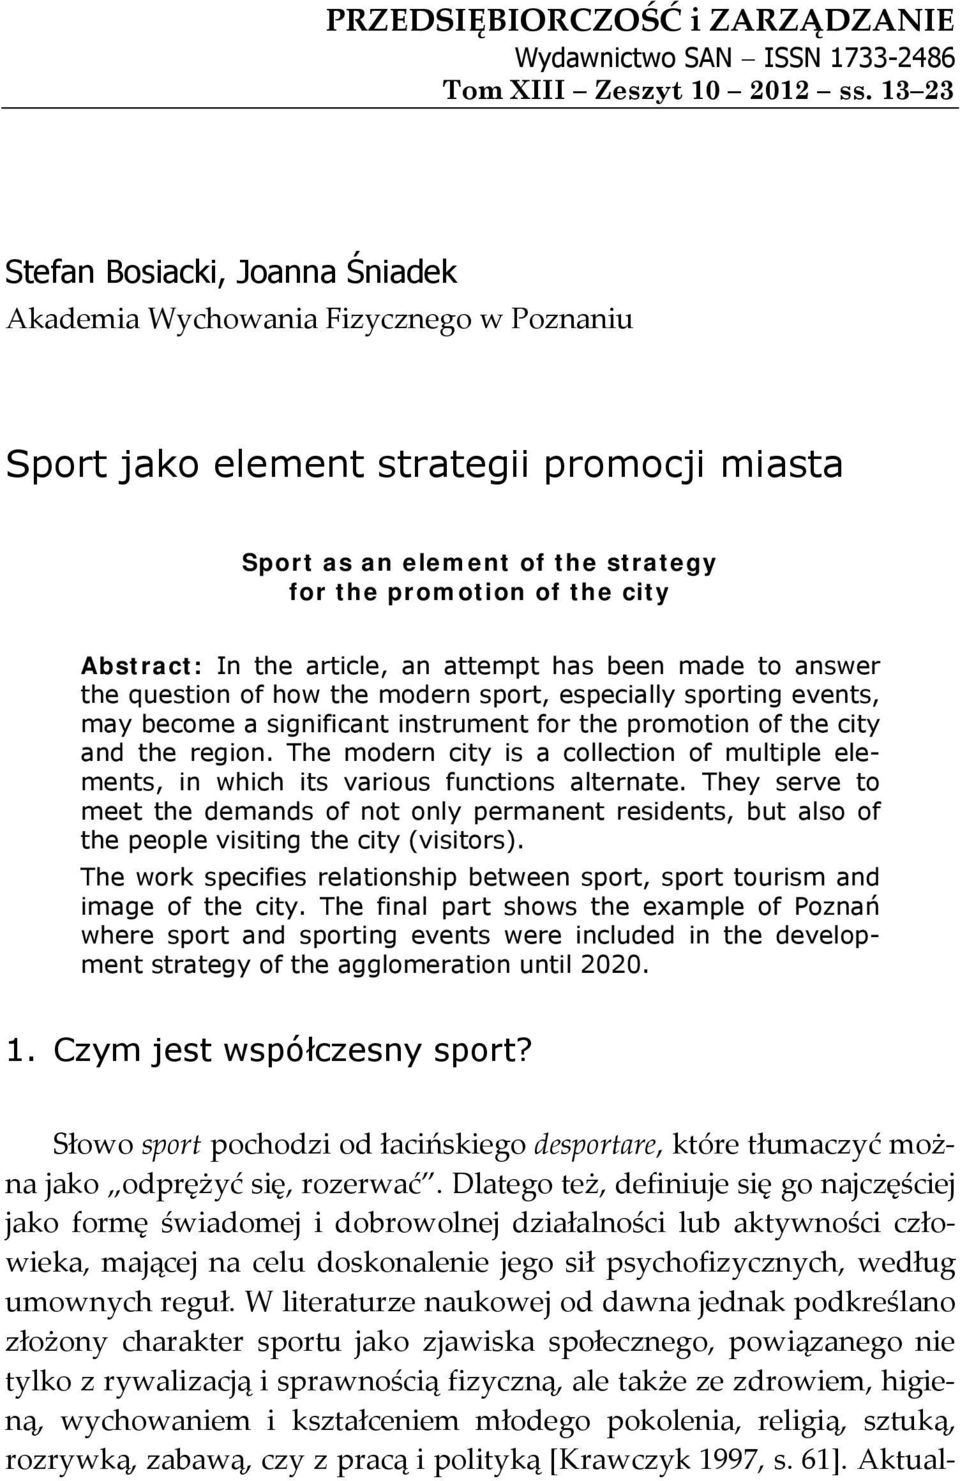 Abstract: In the article, an attempt has been made to answer the question of how the modern sport, especially sporting events, may become a significant instrument for the promotion of the city and